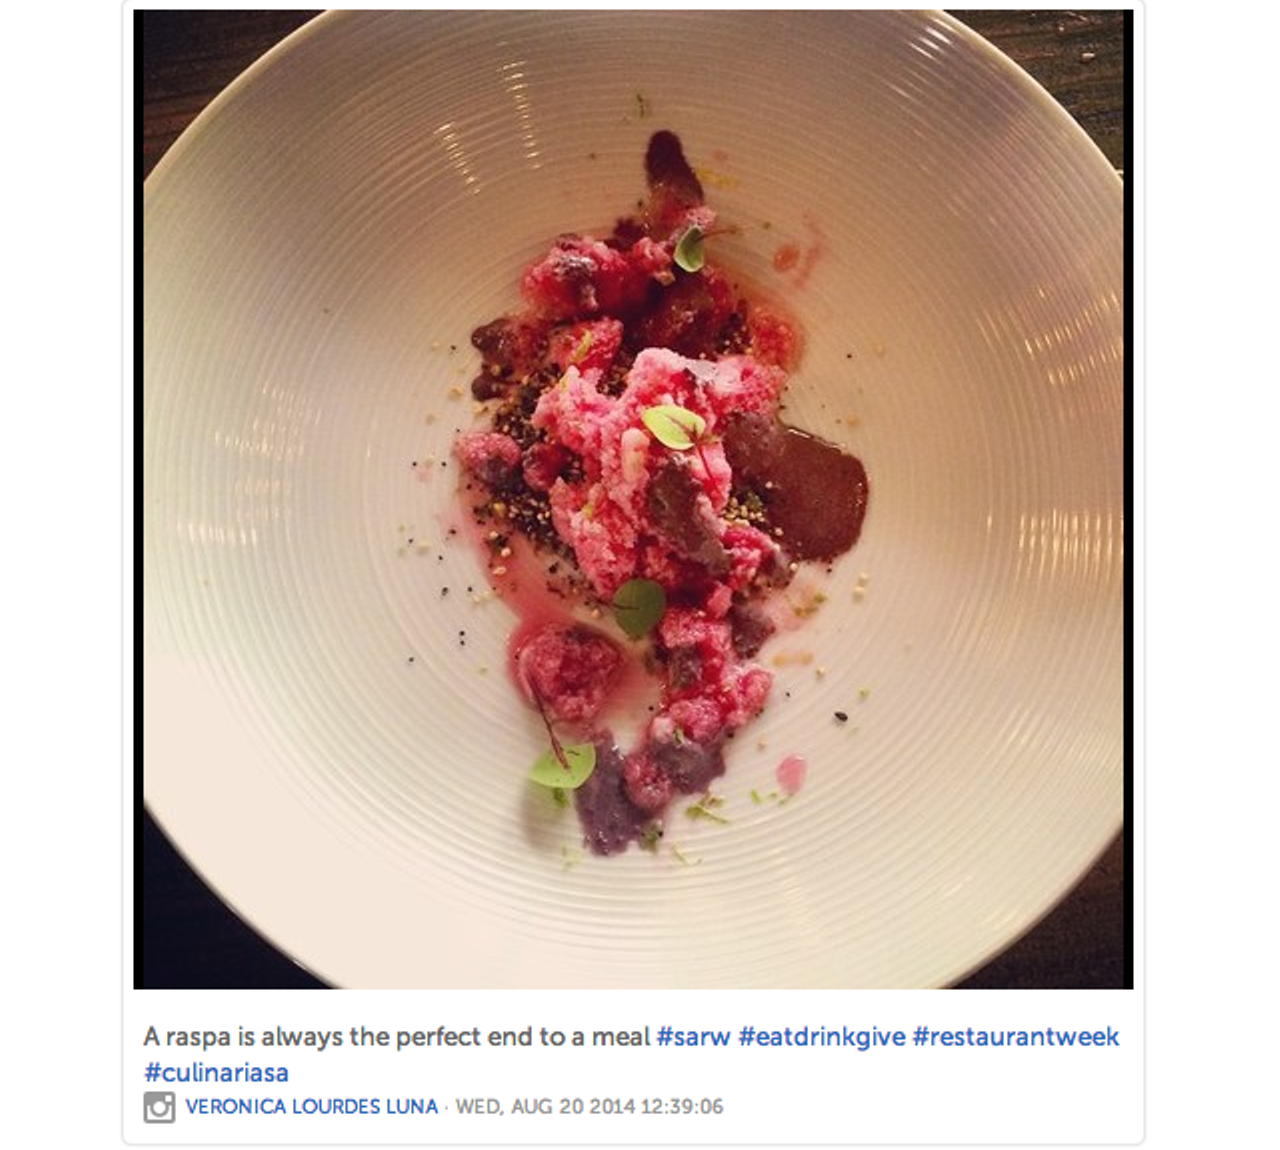 33 of Your Most Delicious Instagrams from Restaurant Week